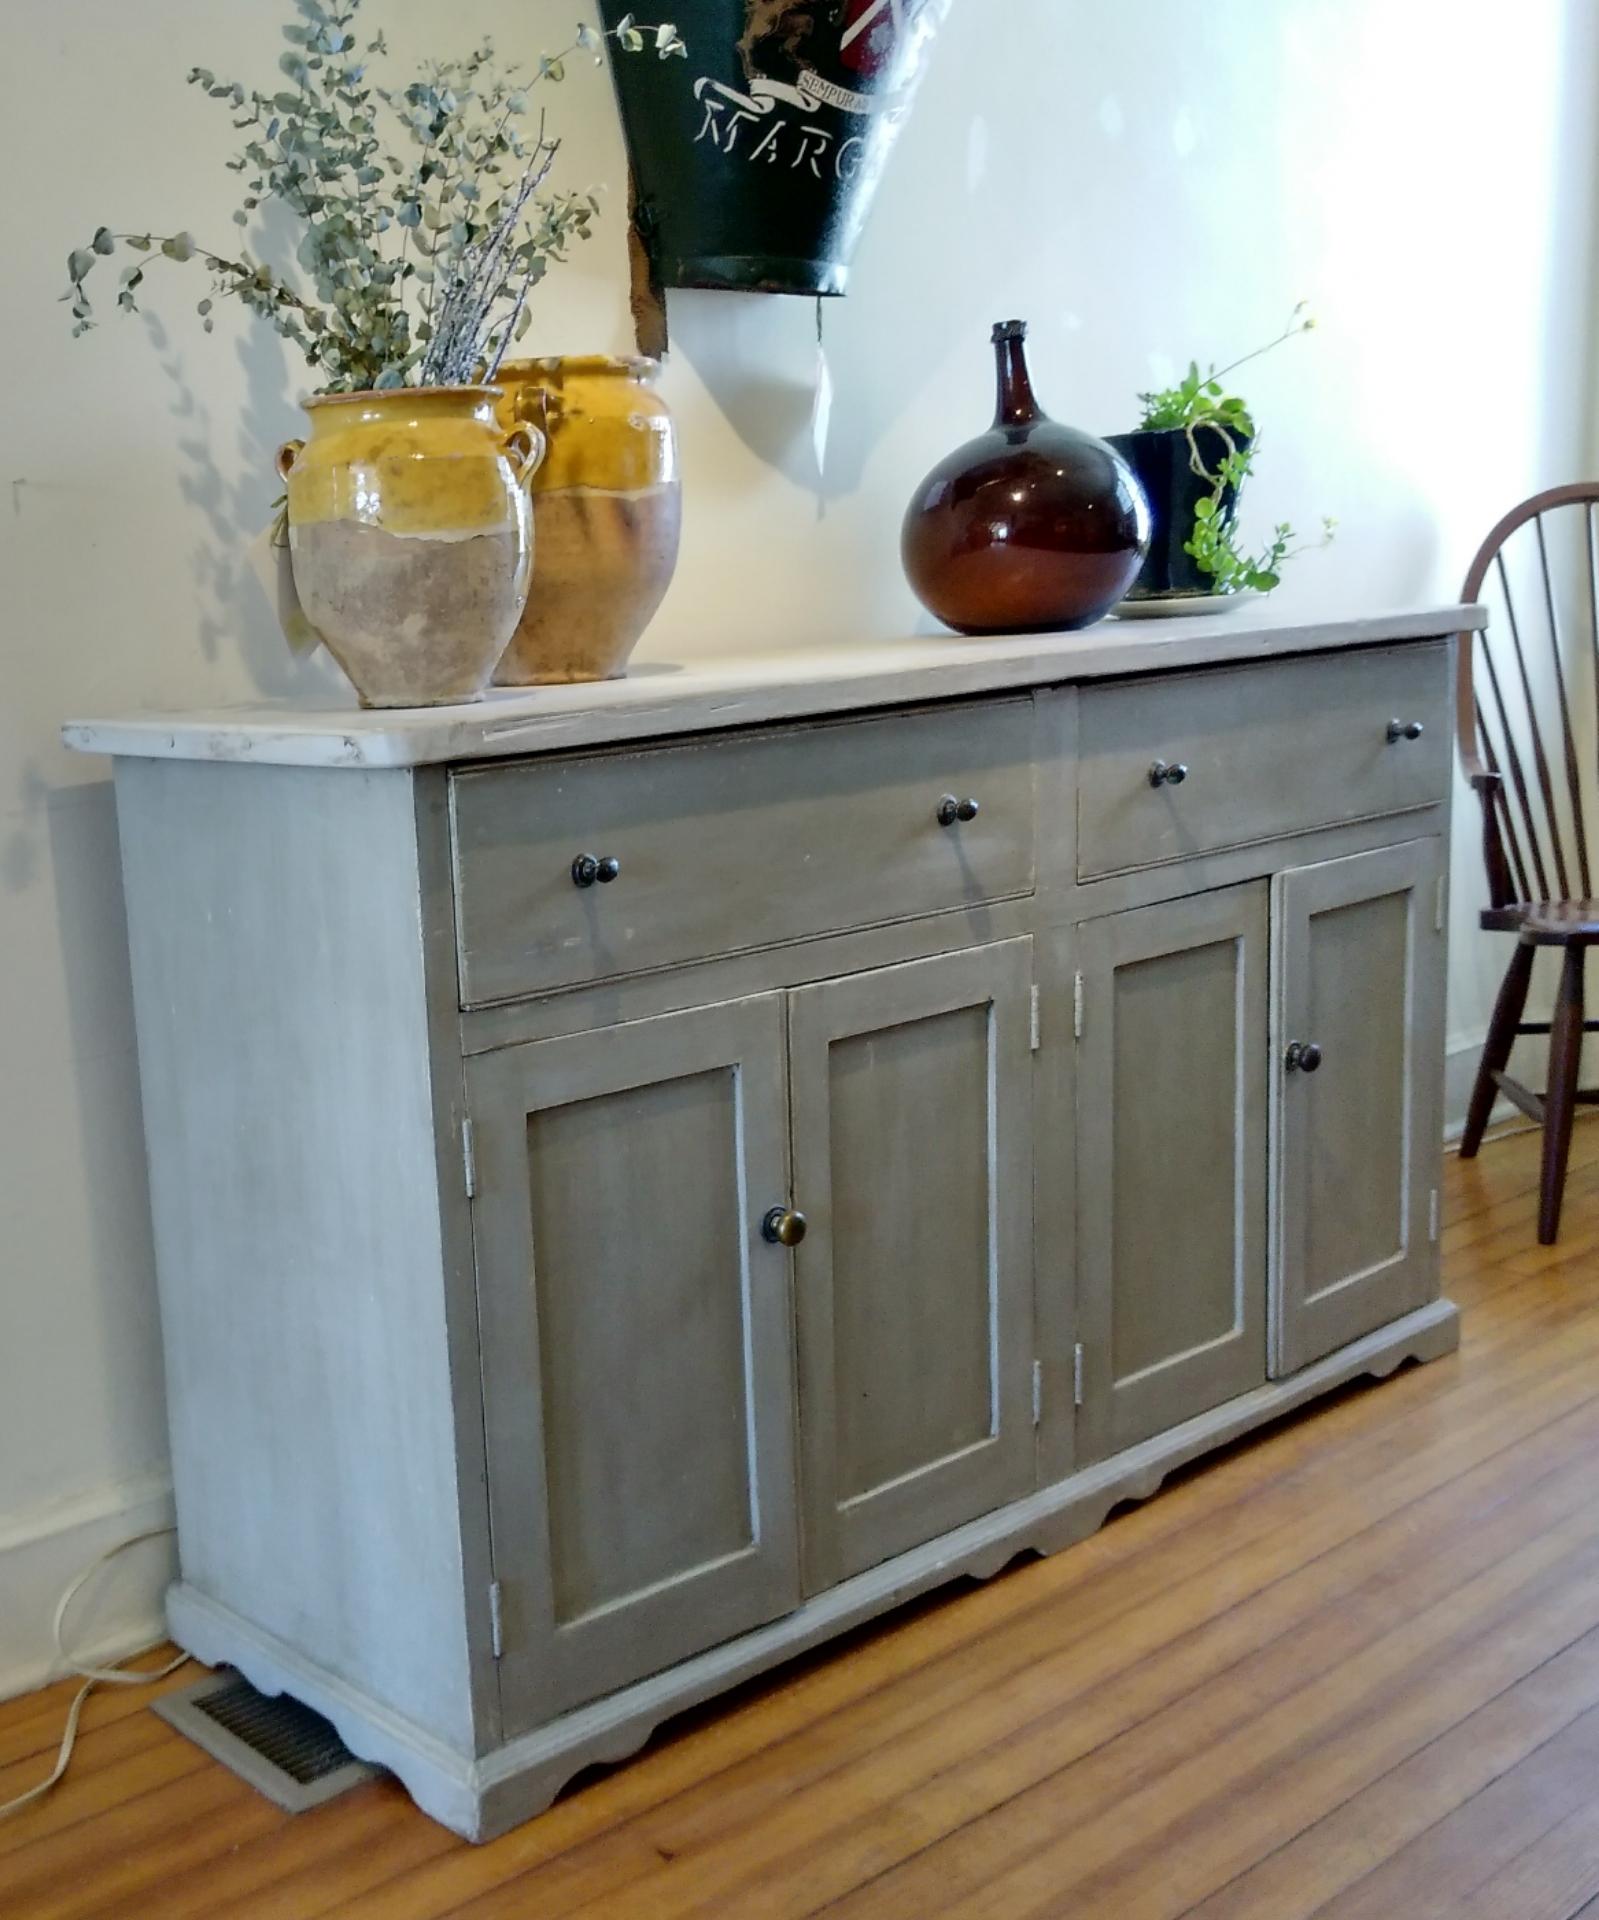 It's the old brass knobs and light pickled top that get your attention on this functional dresser base. Just the right size: not too large, with plenty of storage. The paint color is a very soft grey-green that is both country and elegant. This is a